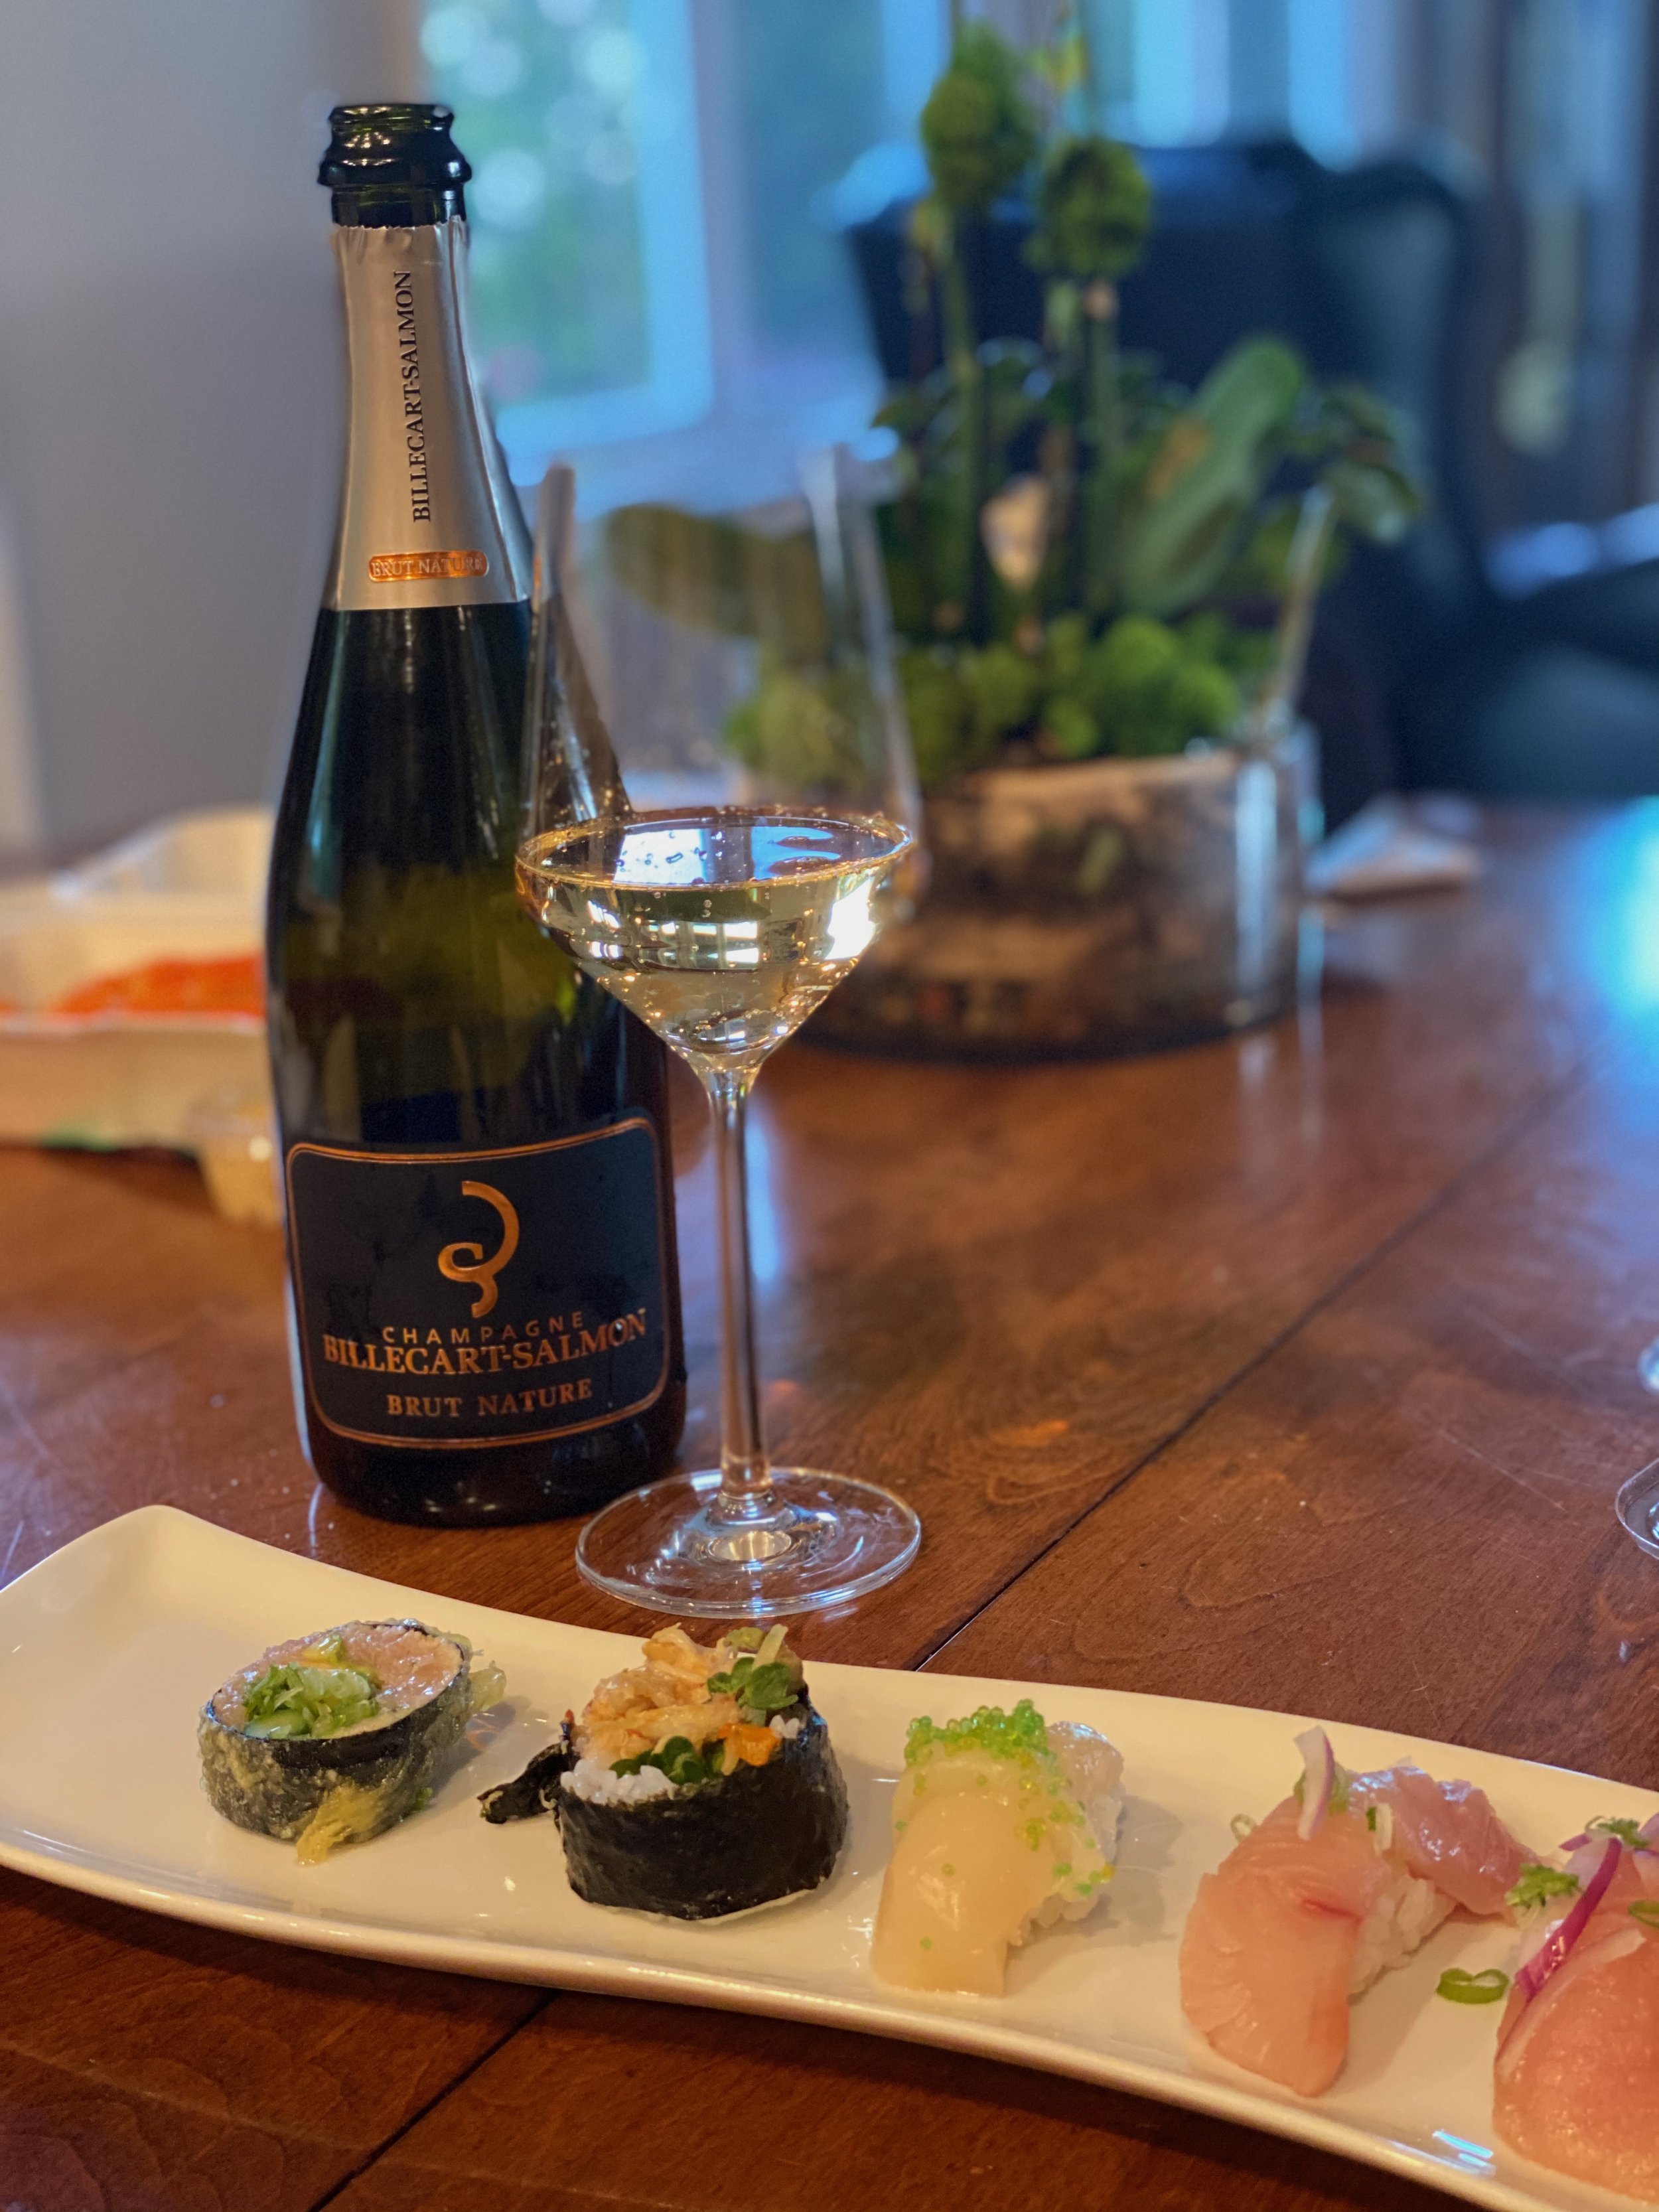 Sushi and Champagne Billeart Brut Nature Pairing.jpg